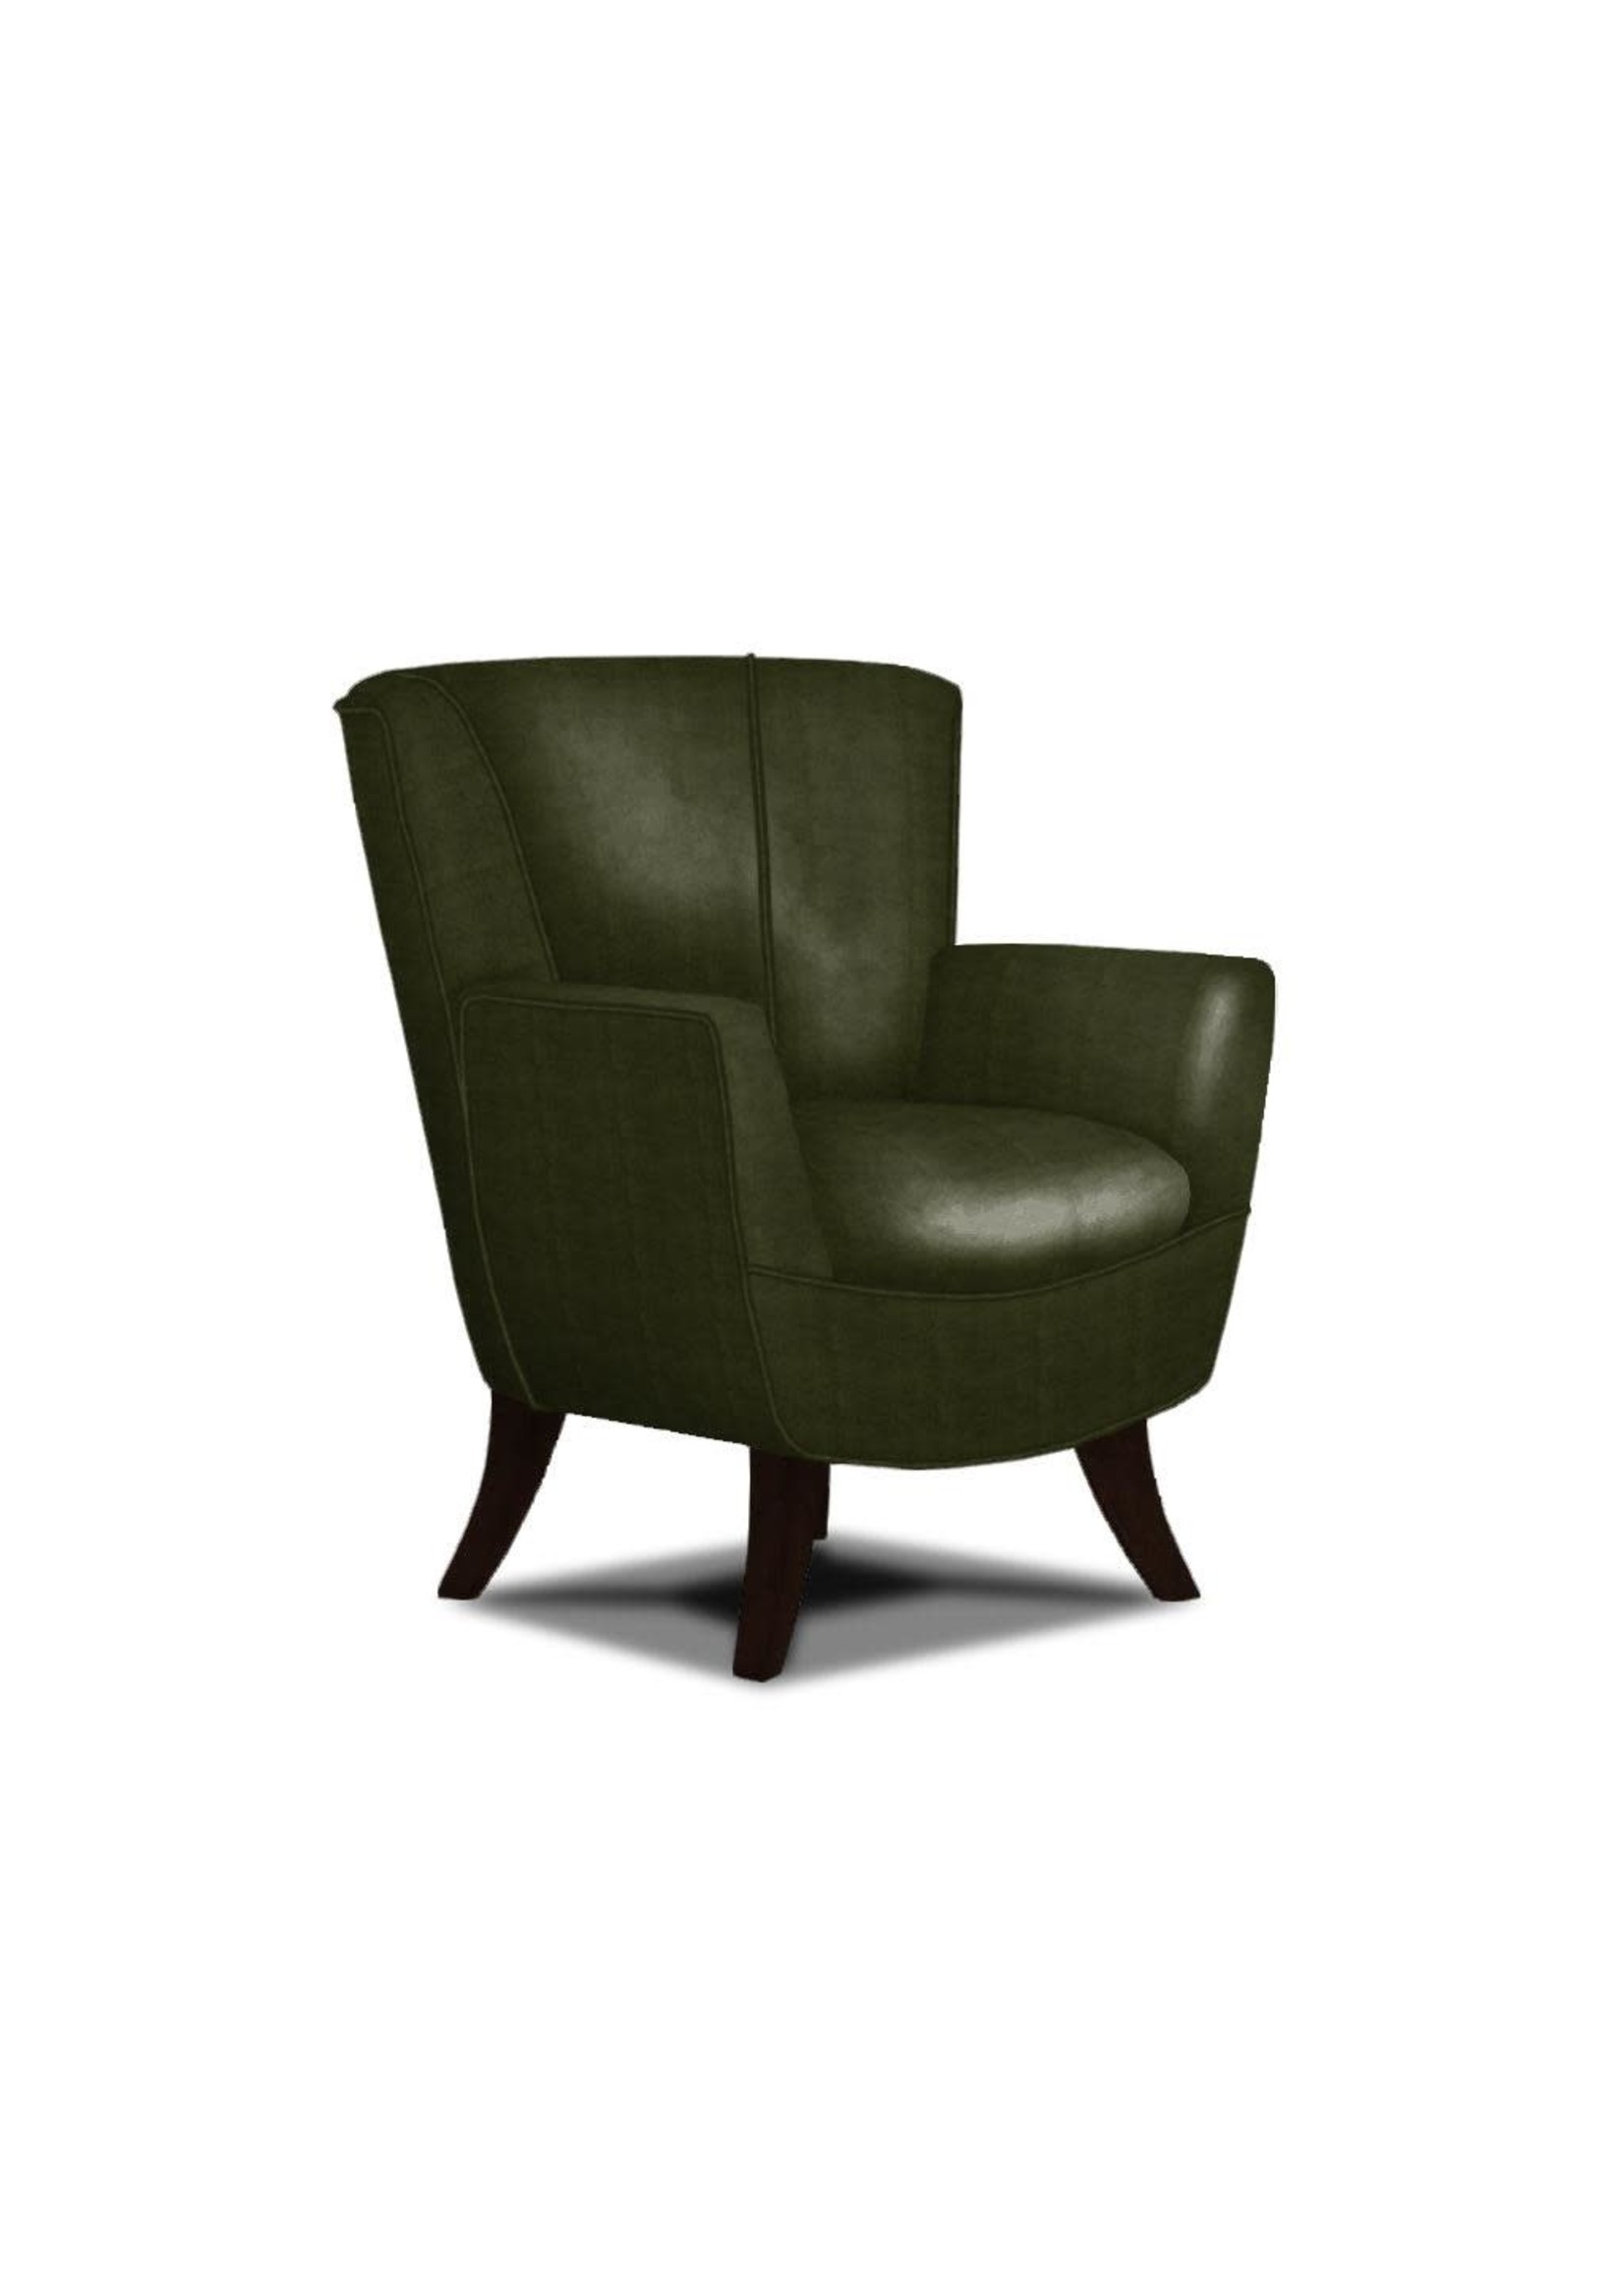 BEST BETHANY CHAIR